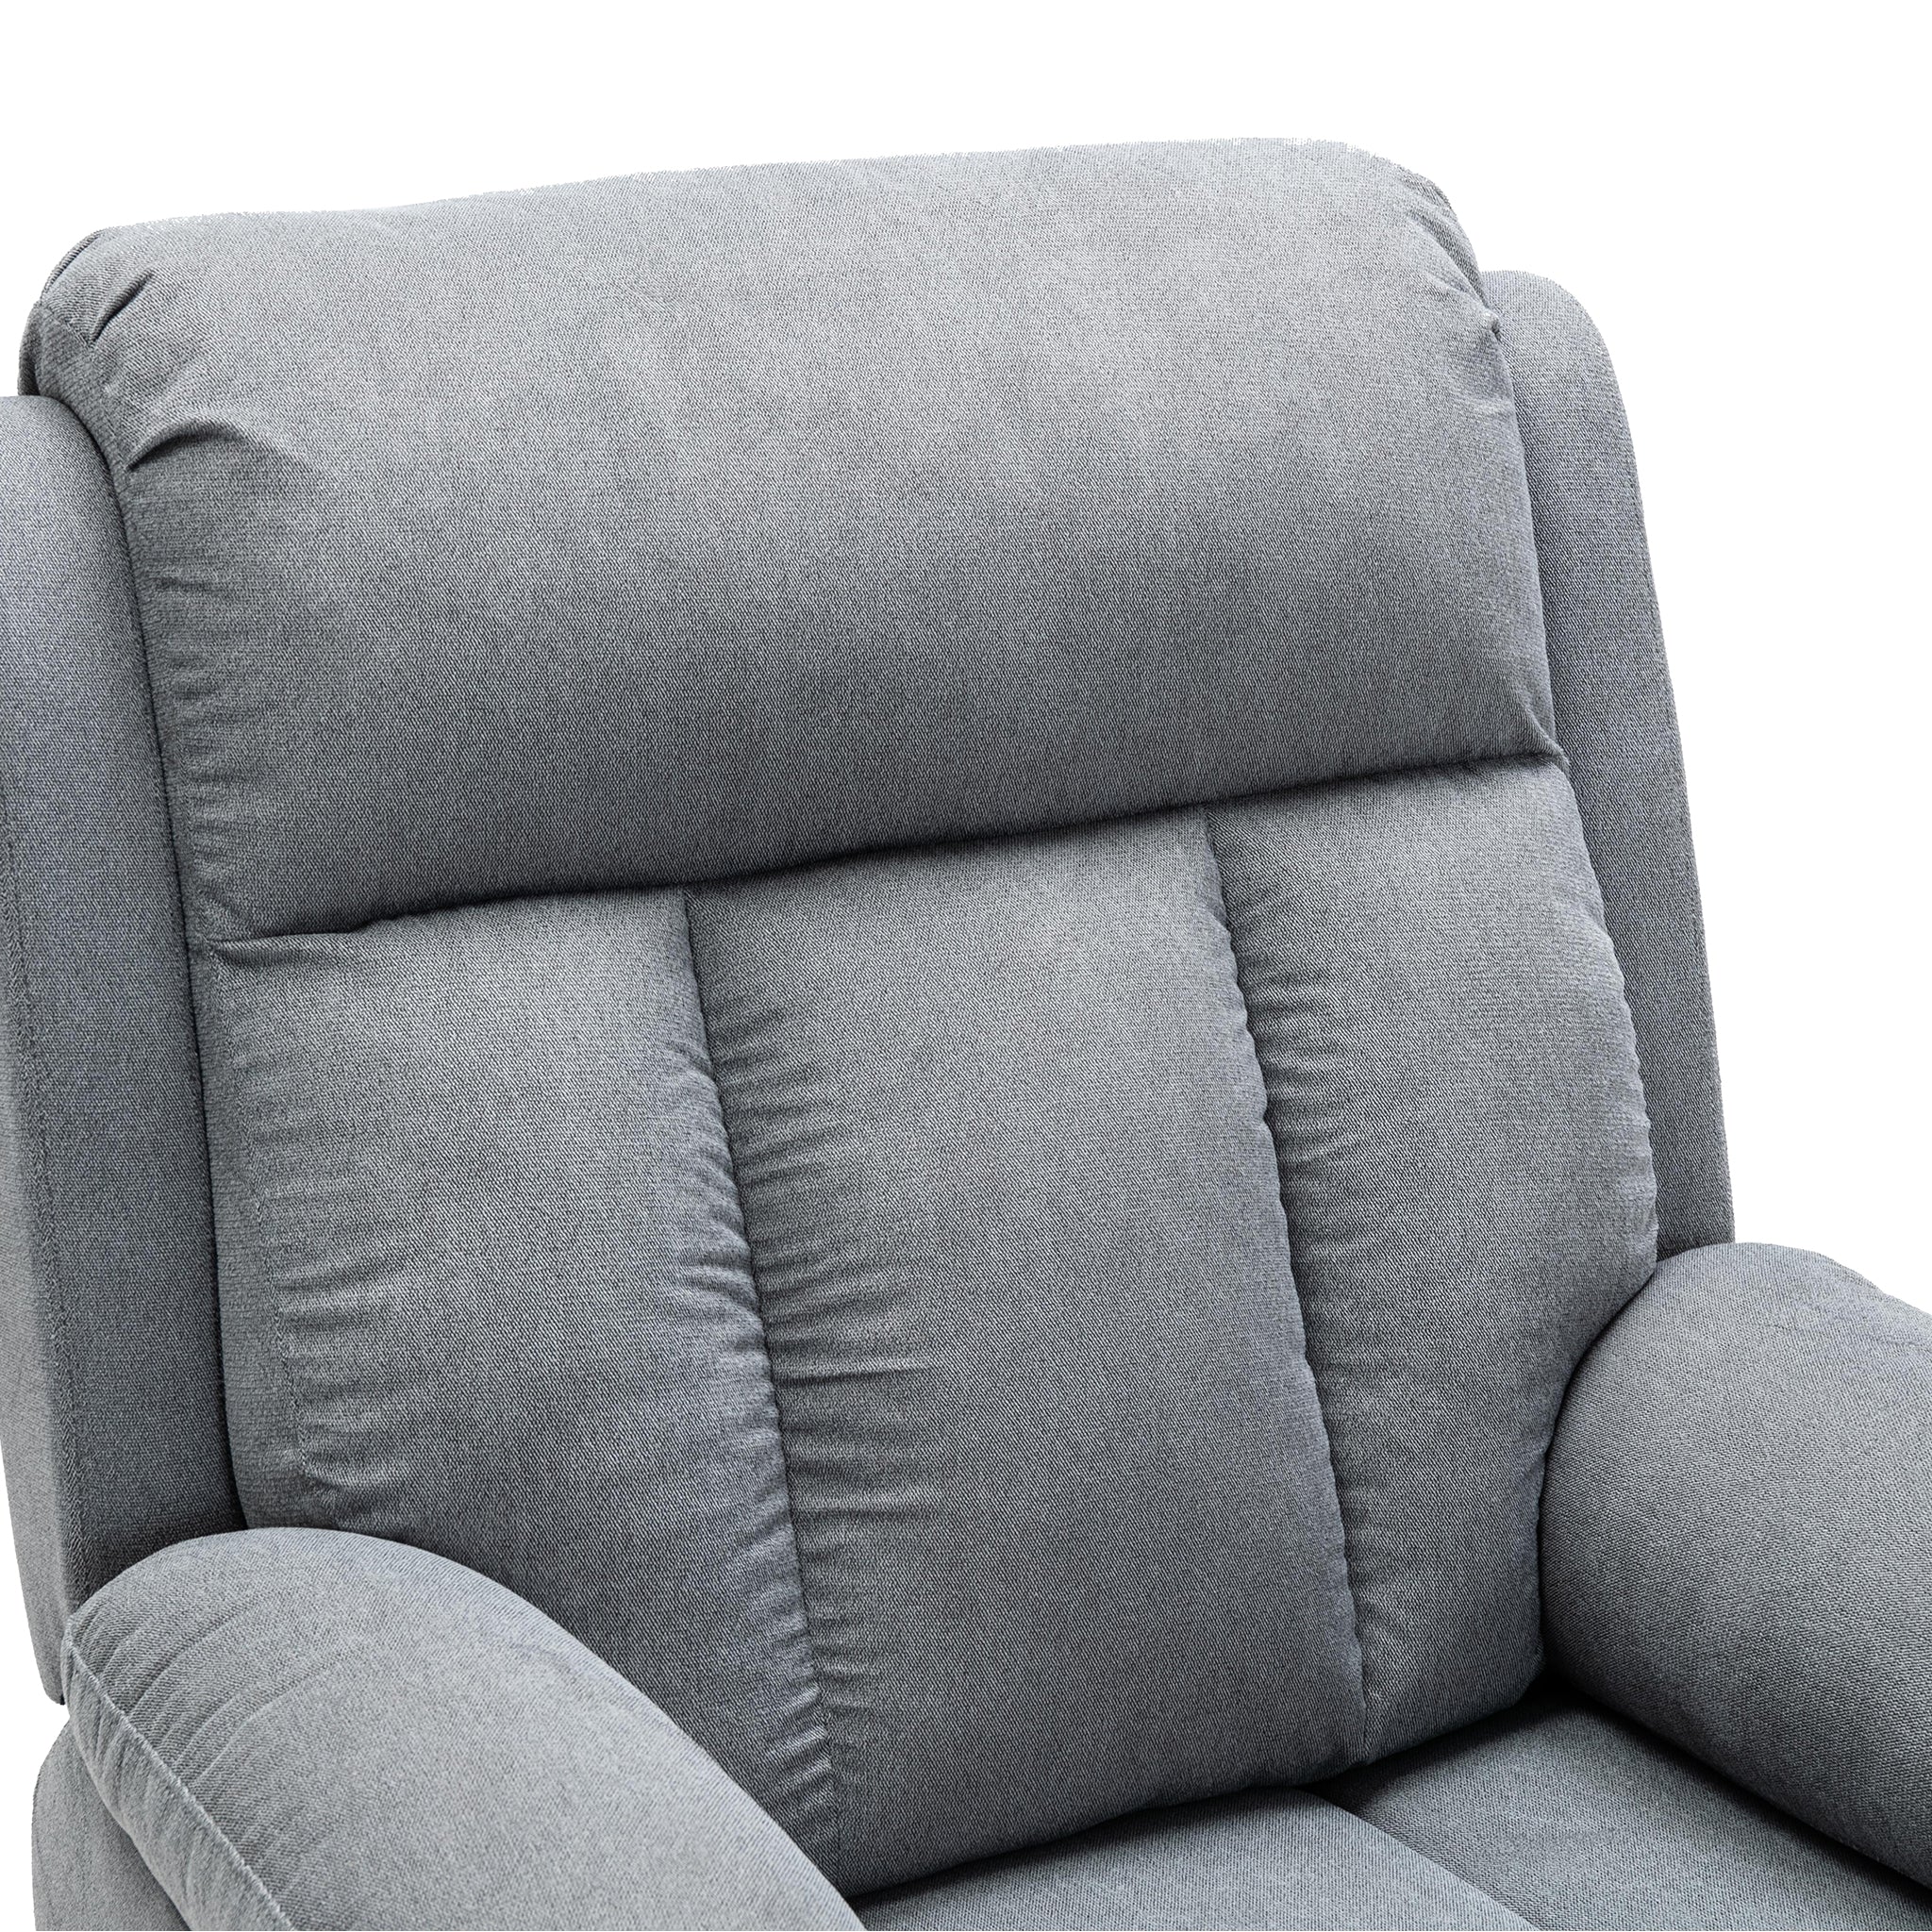 Lexi Recliner Armchair in Grey, Model CR-2032, Comfortable Seating Furniture0